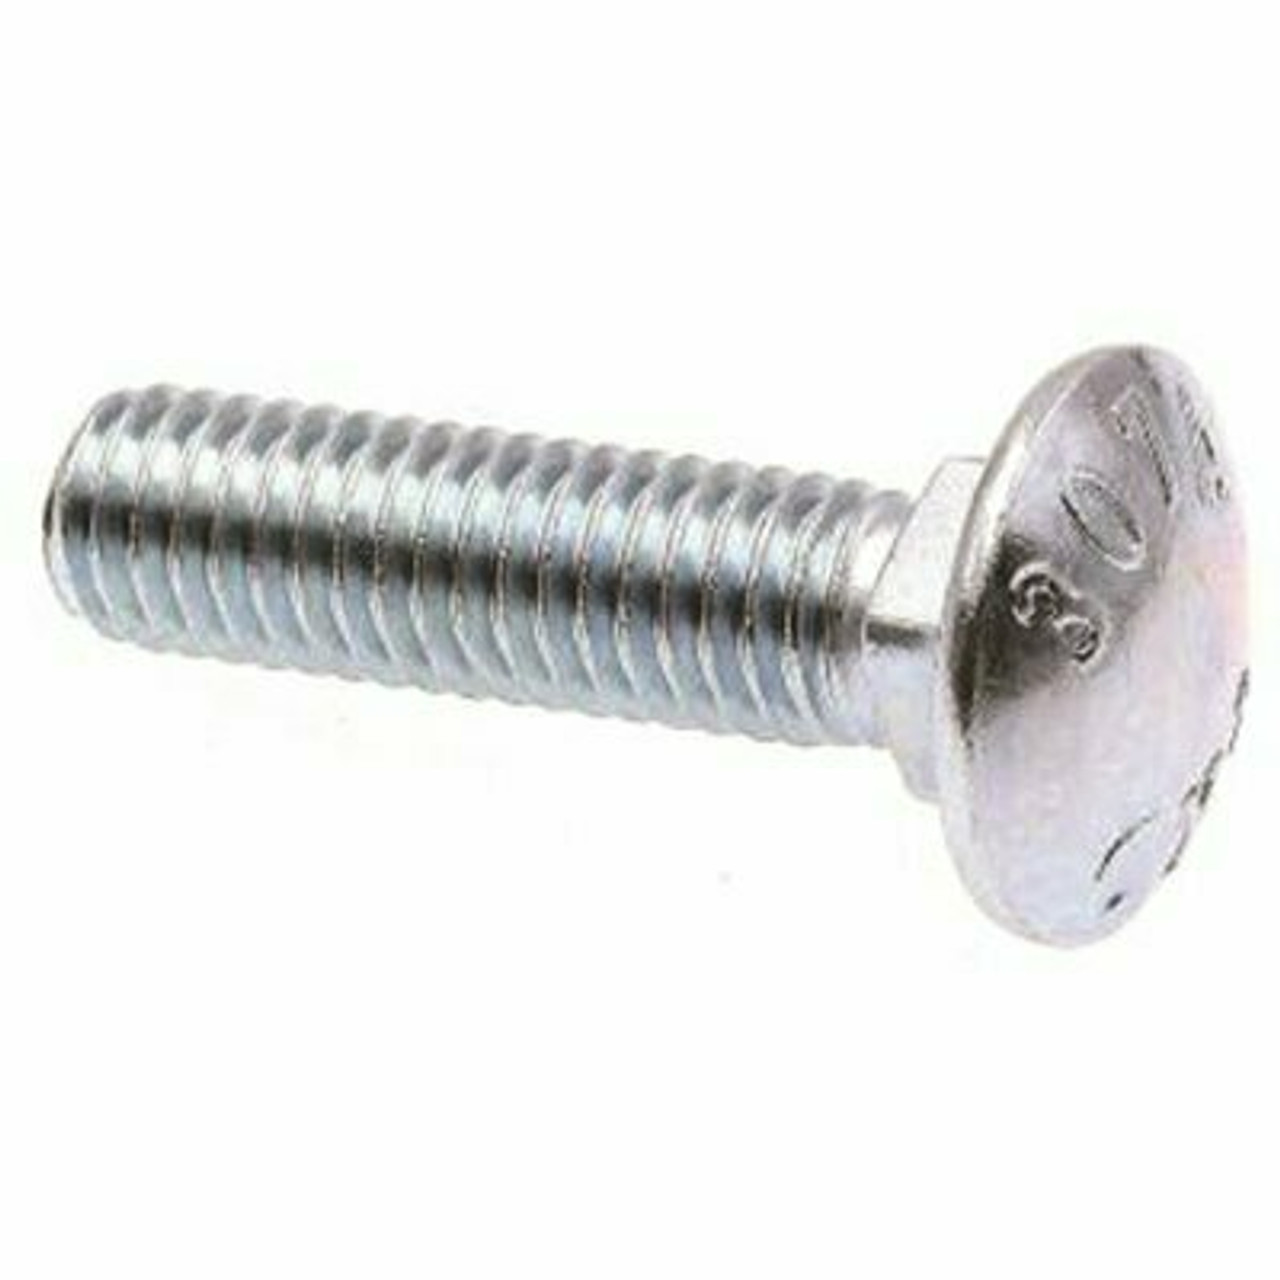 1/2 In.-13 X 2 In. Zinc Plated Carriage Bolts (50 Per Pack)